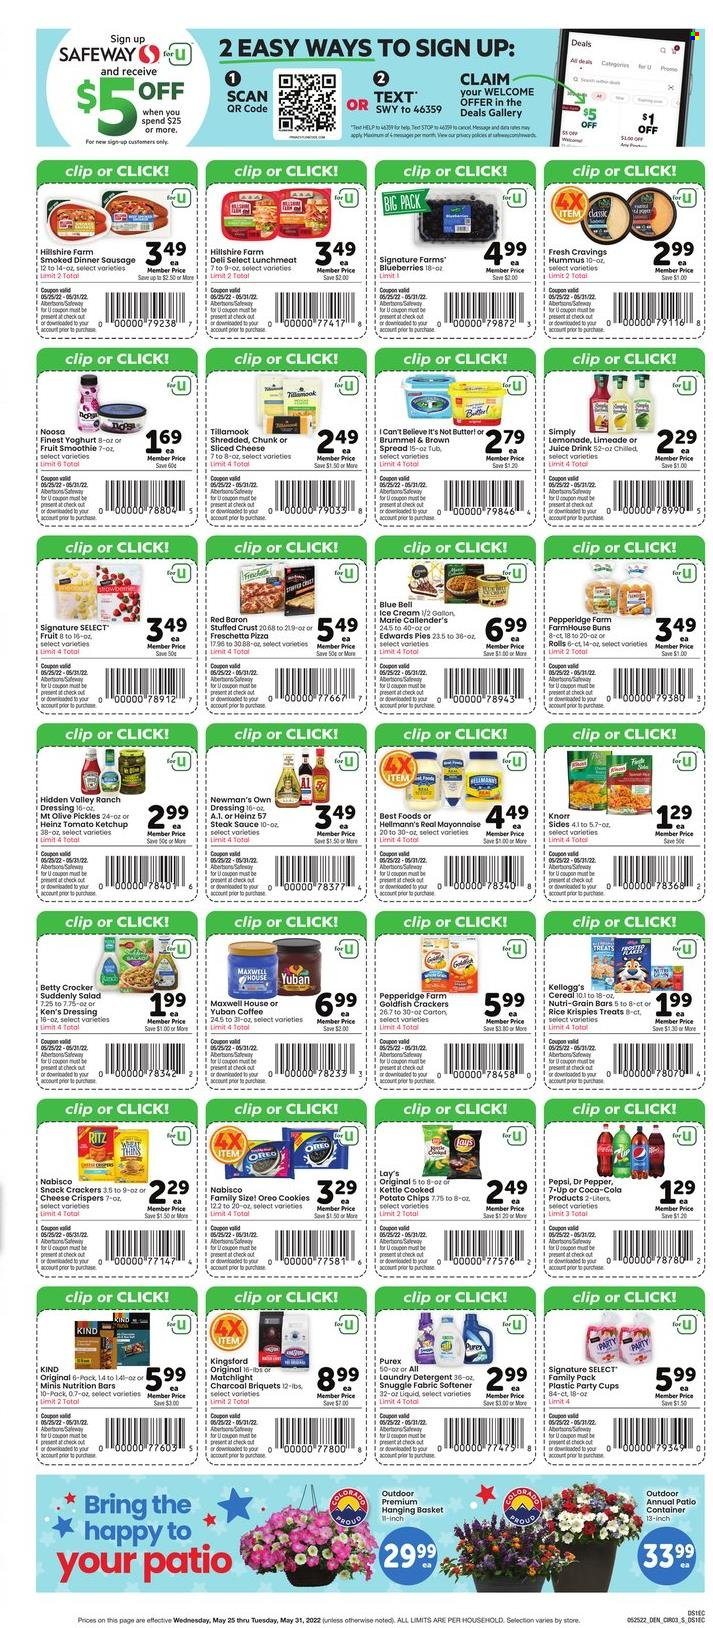 thumbnail - Safeway Flyer - 05/25/2022 - 05/31/2022 - Sales products - buns, salad, blueberries, steak, pizza, Knorr, sauce, Marie Callender's, Hillshire Farm, sausage, lunch meat, sliced cheese, Oreo, yoghurt, butter, I Can't Believe It's Not Butter, mayonnaise, Hellmann’s, ice cream, Blue Bell, Red Baron, cookies, snack, crackers, Kellogg's, RITZ, potato chips, chips, Lay’s, Thins, Goldfish, Heinz, pickles, cereals, nutrition bar, Rice Krispies, Nutri-Grain, steak sauce, ketchup, dressing, Coca-Cola, lemonade, Pepsi, juice, Dr. Pepper, smoothie, Maxwell House, coffee, detergent, Snuggle, fabric softener, laundry detergent, Purex, basket, cup, container, party cups, tote, briquettes, Kingsford, charcoal. Page 3.